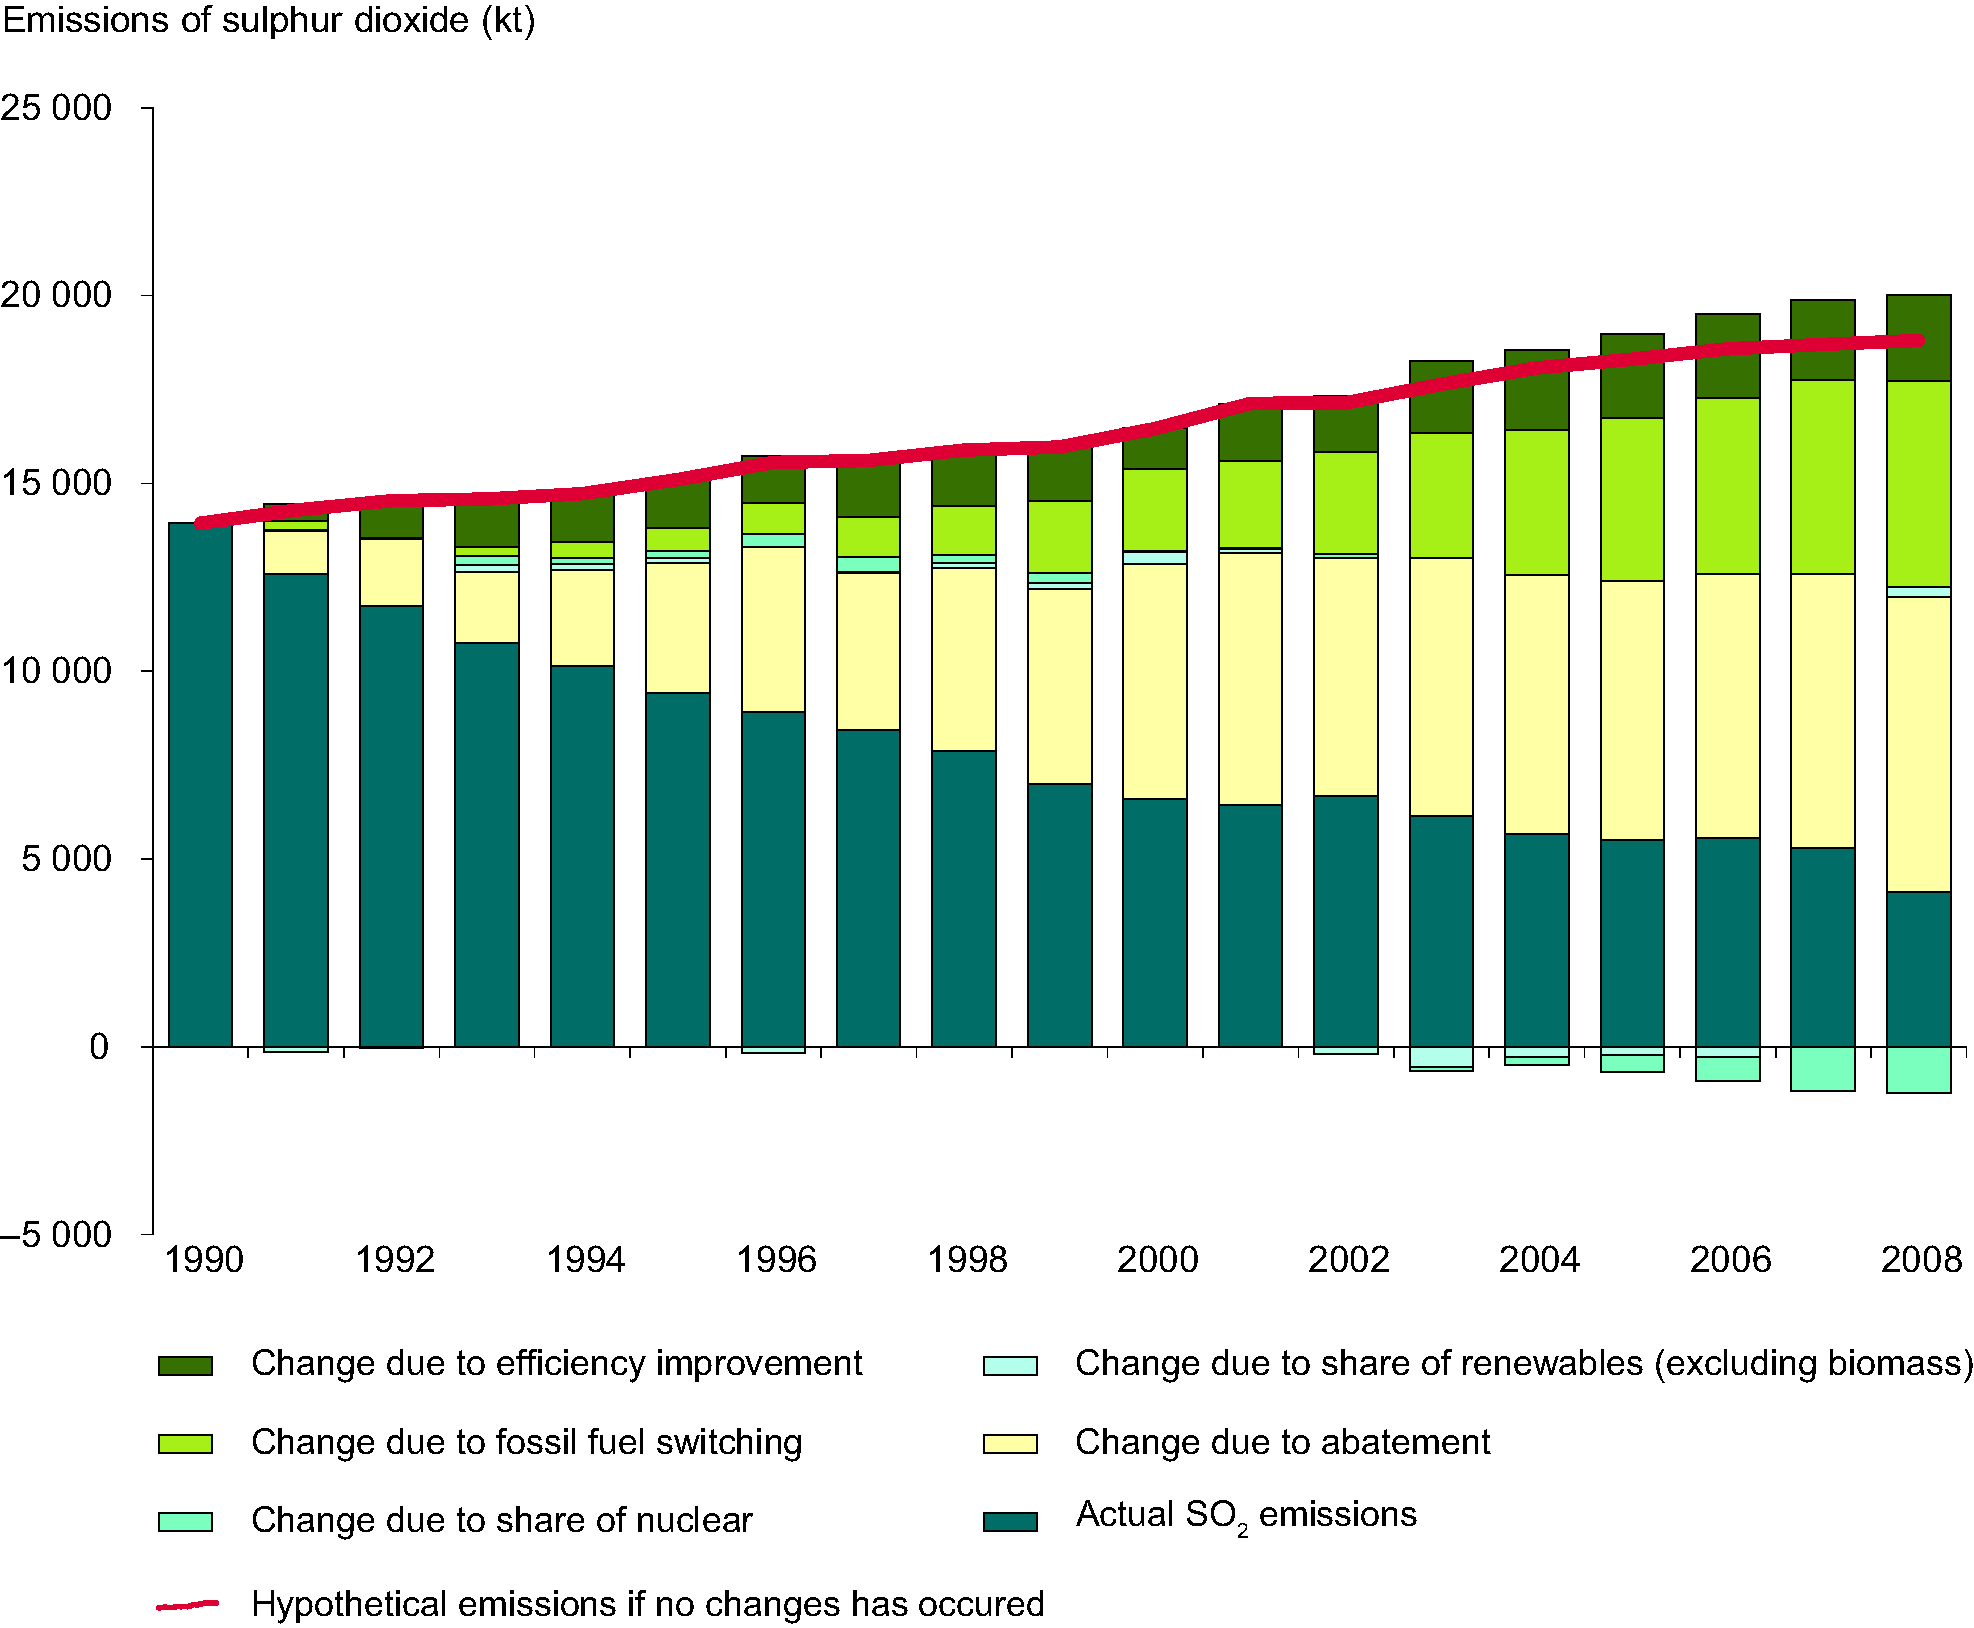 Estimated impact of different factors on the reduction in emissions of SO2 from public electricity and heat production between 1990 and 2008, EEA-32